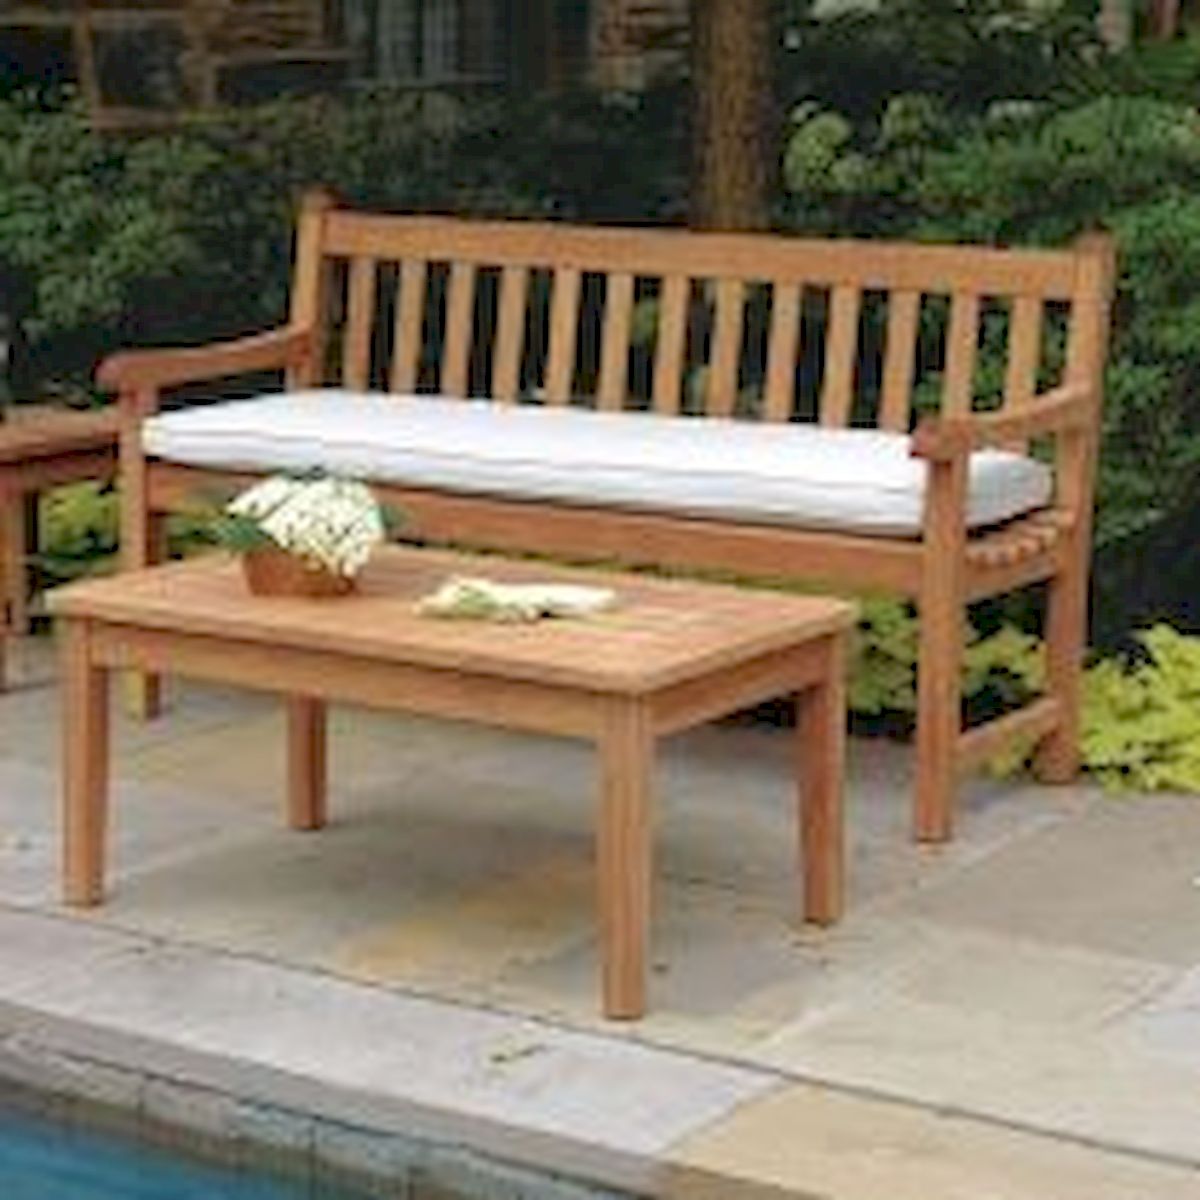 50 Amazing DIY Projects Outdoor Furniture Design Ideas (15)